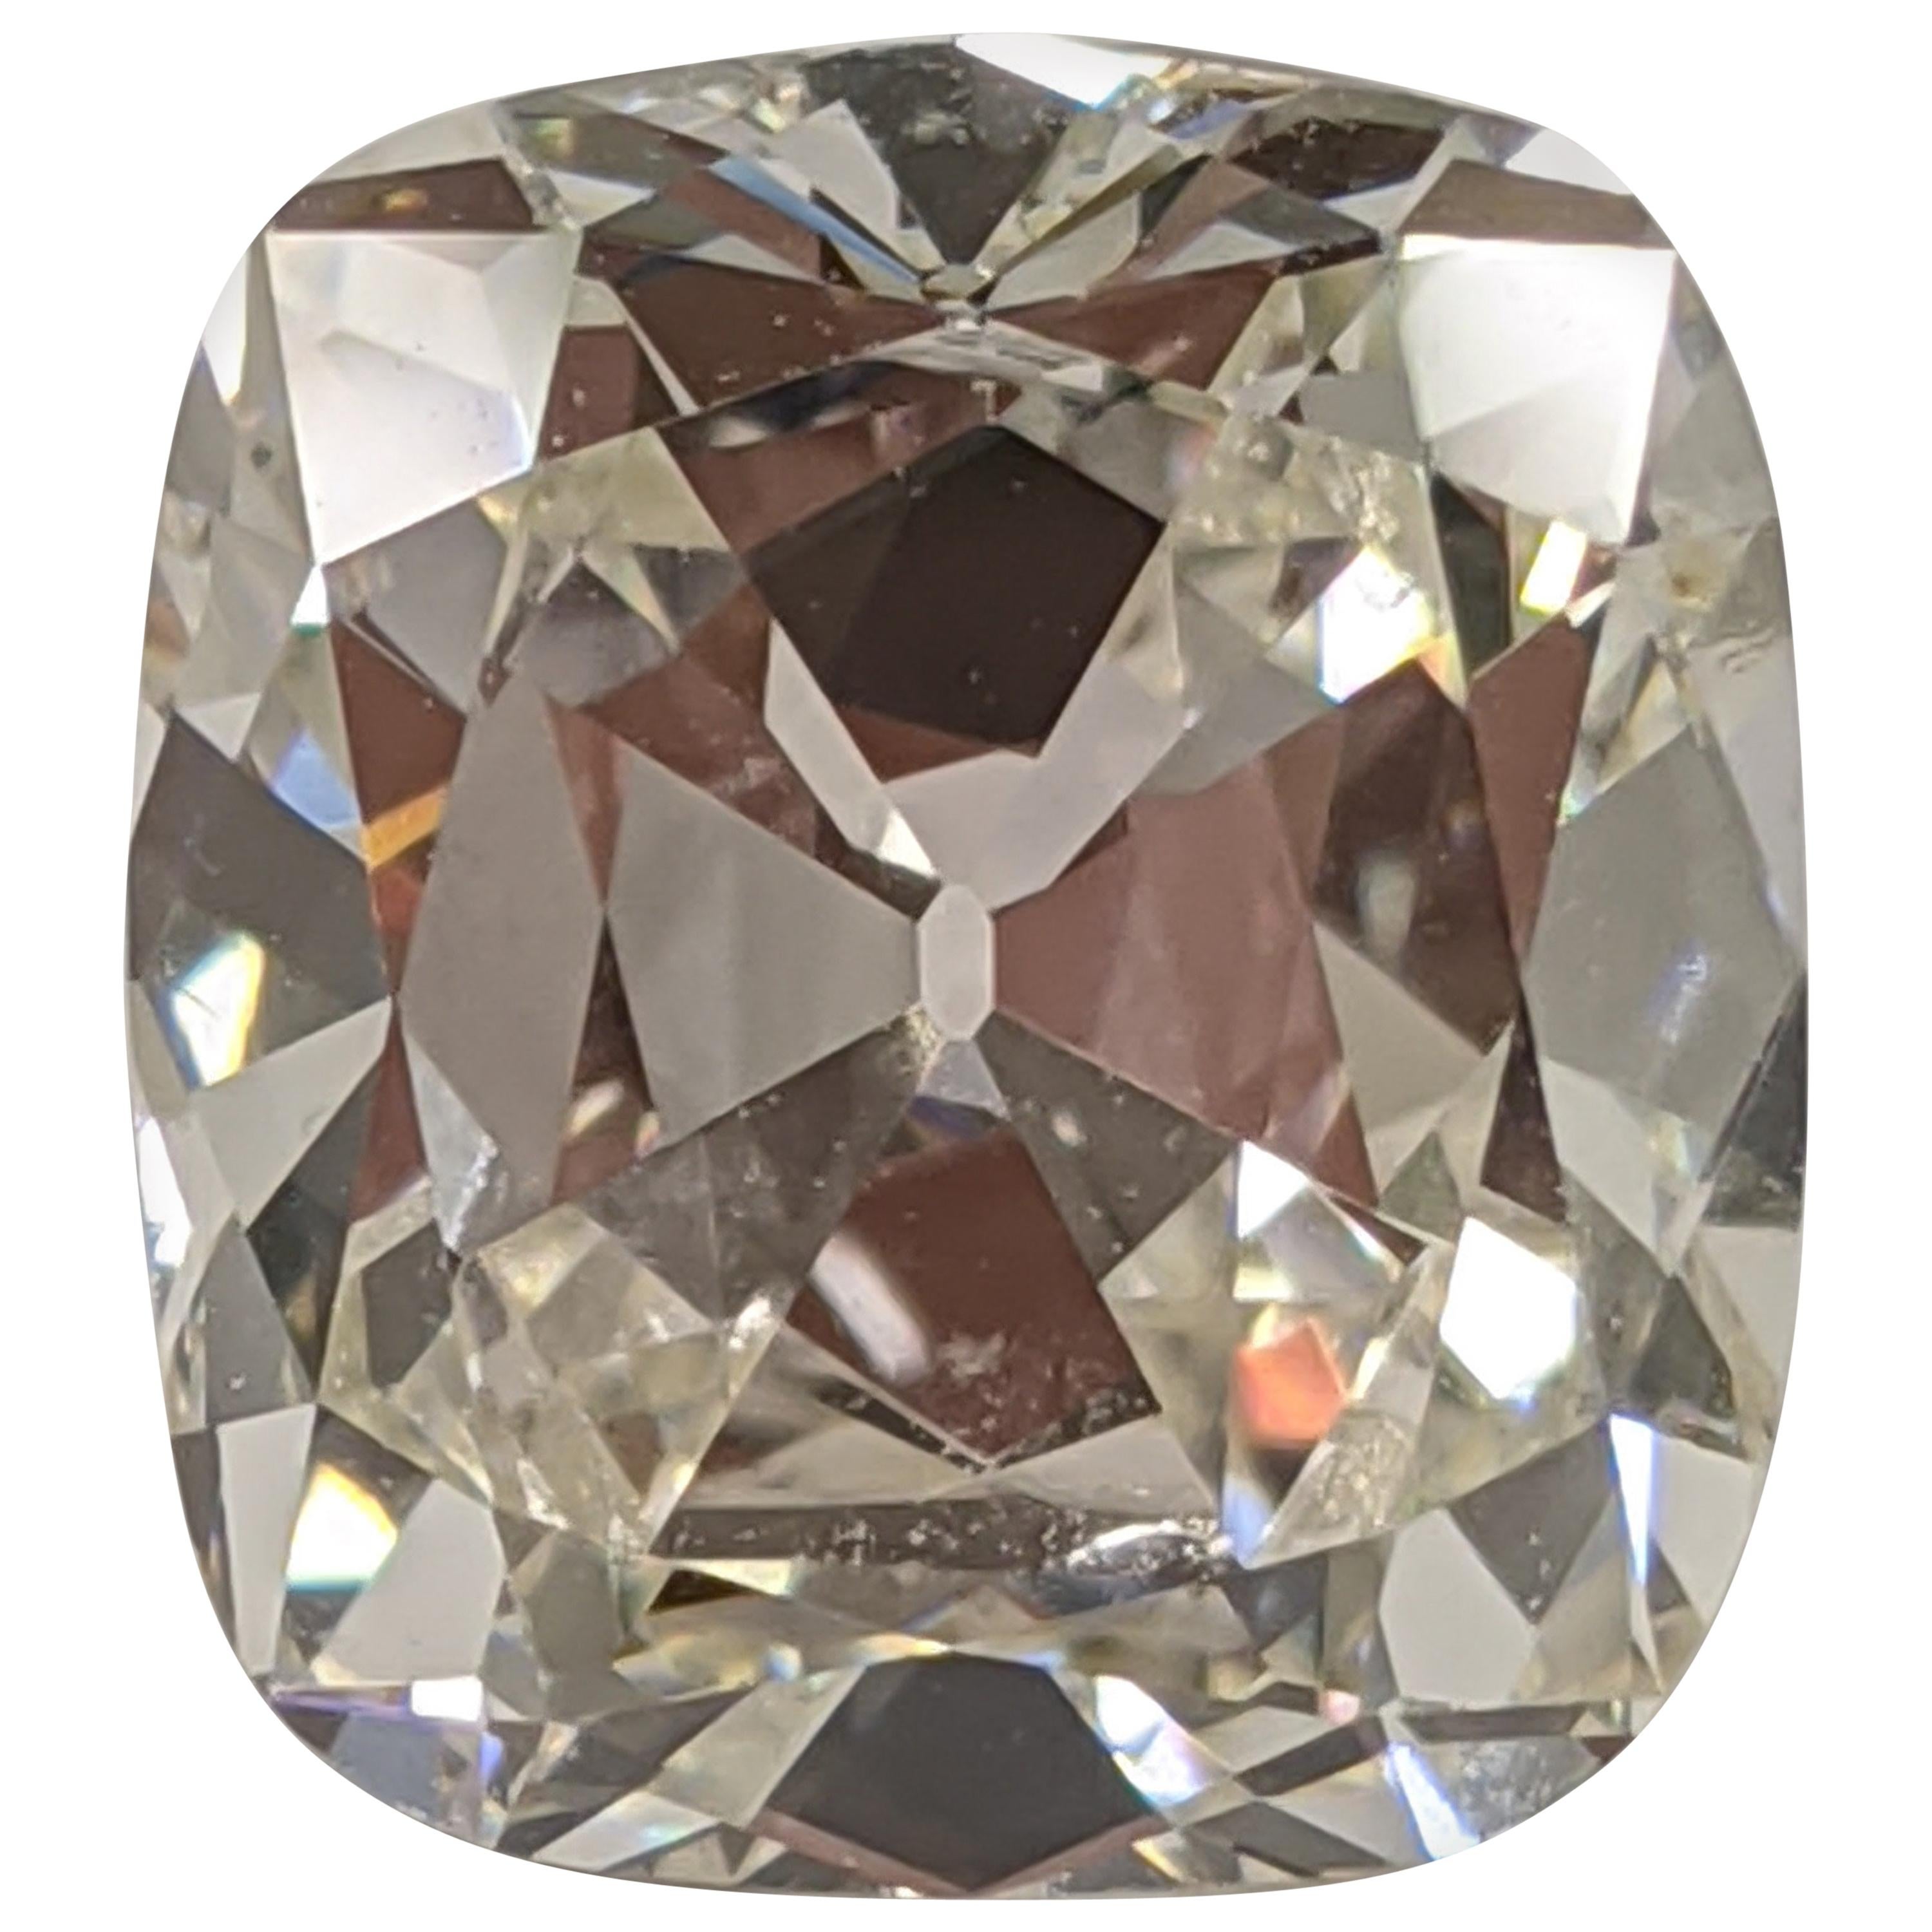 5 Carat Vintage Style Cushion Cut Diamond for High Design Project, GIA